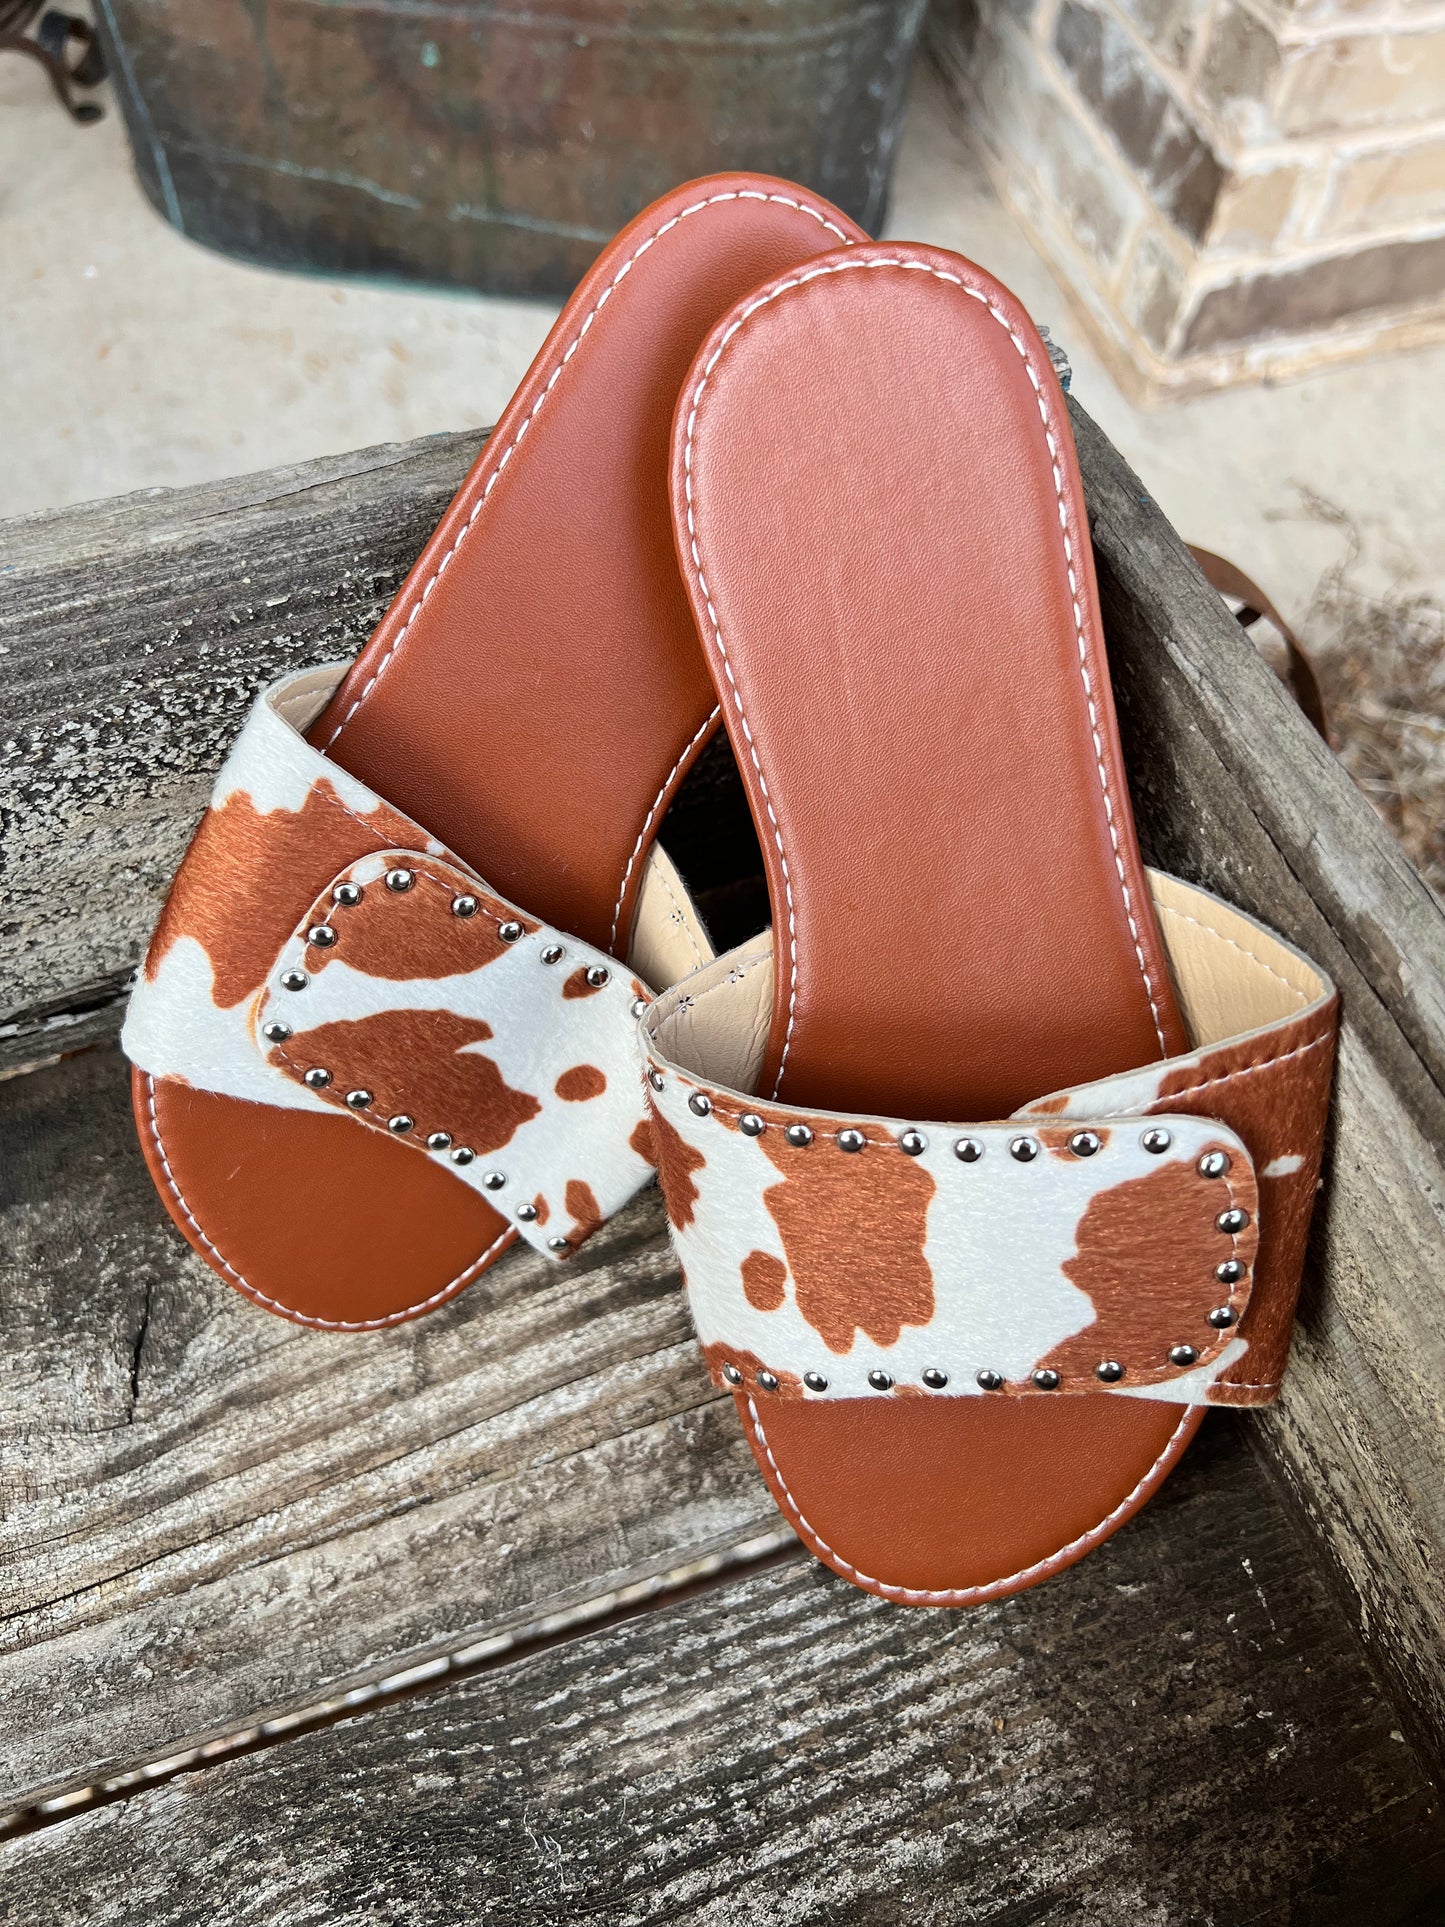 Livin’ It Up Sandals {Brown Cow print}